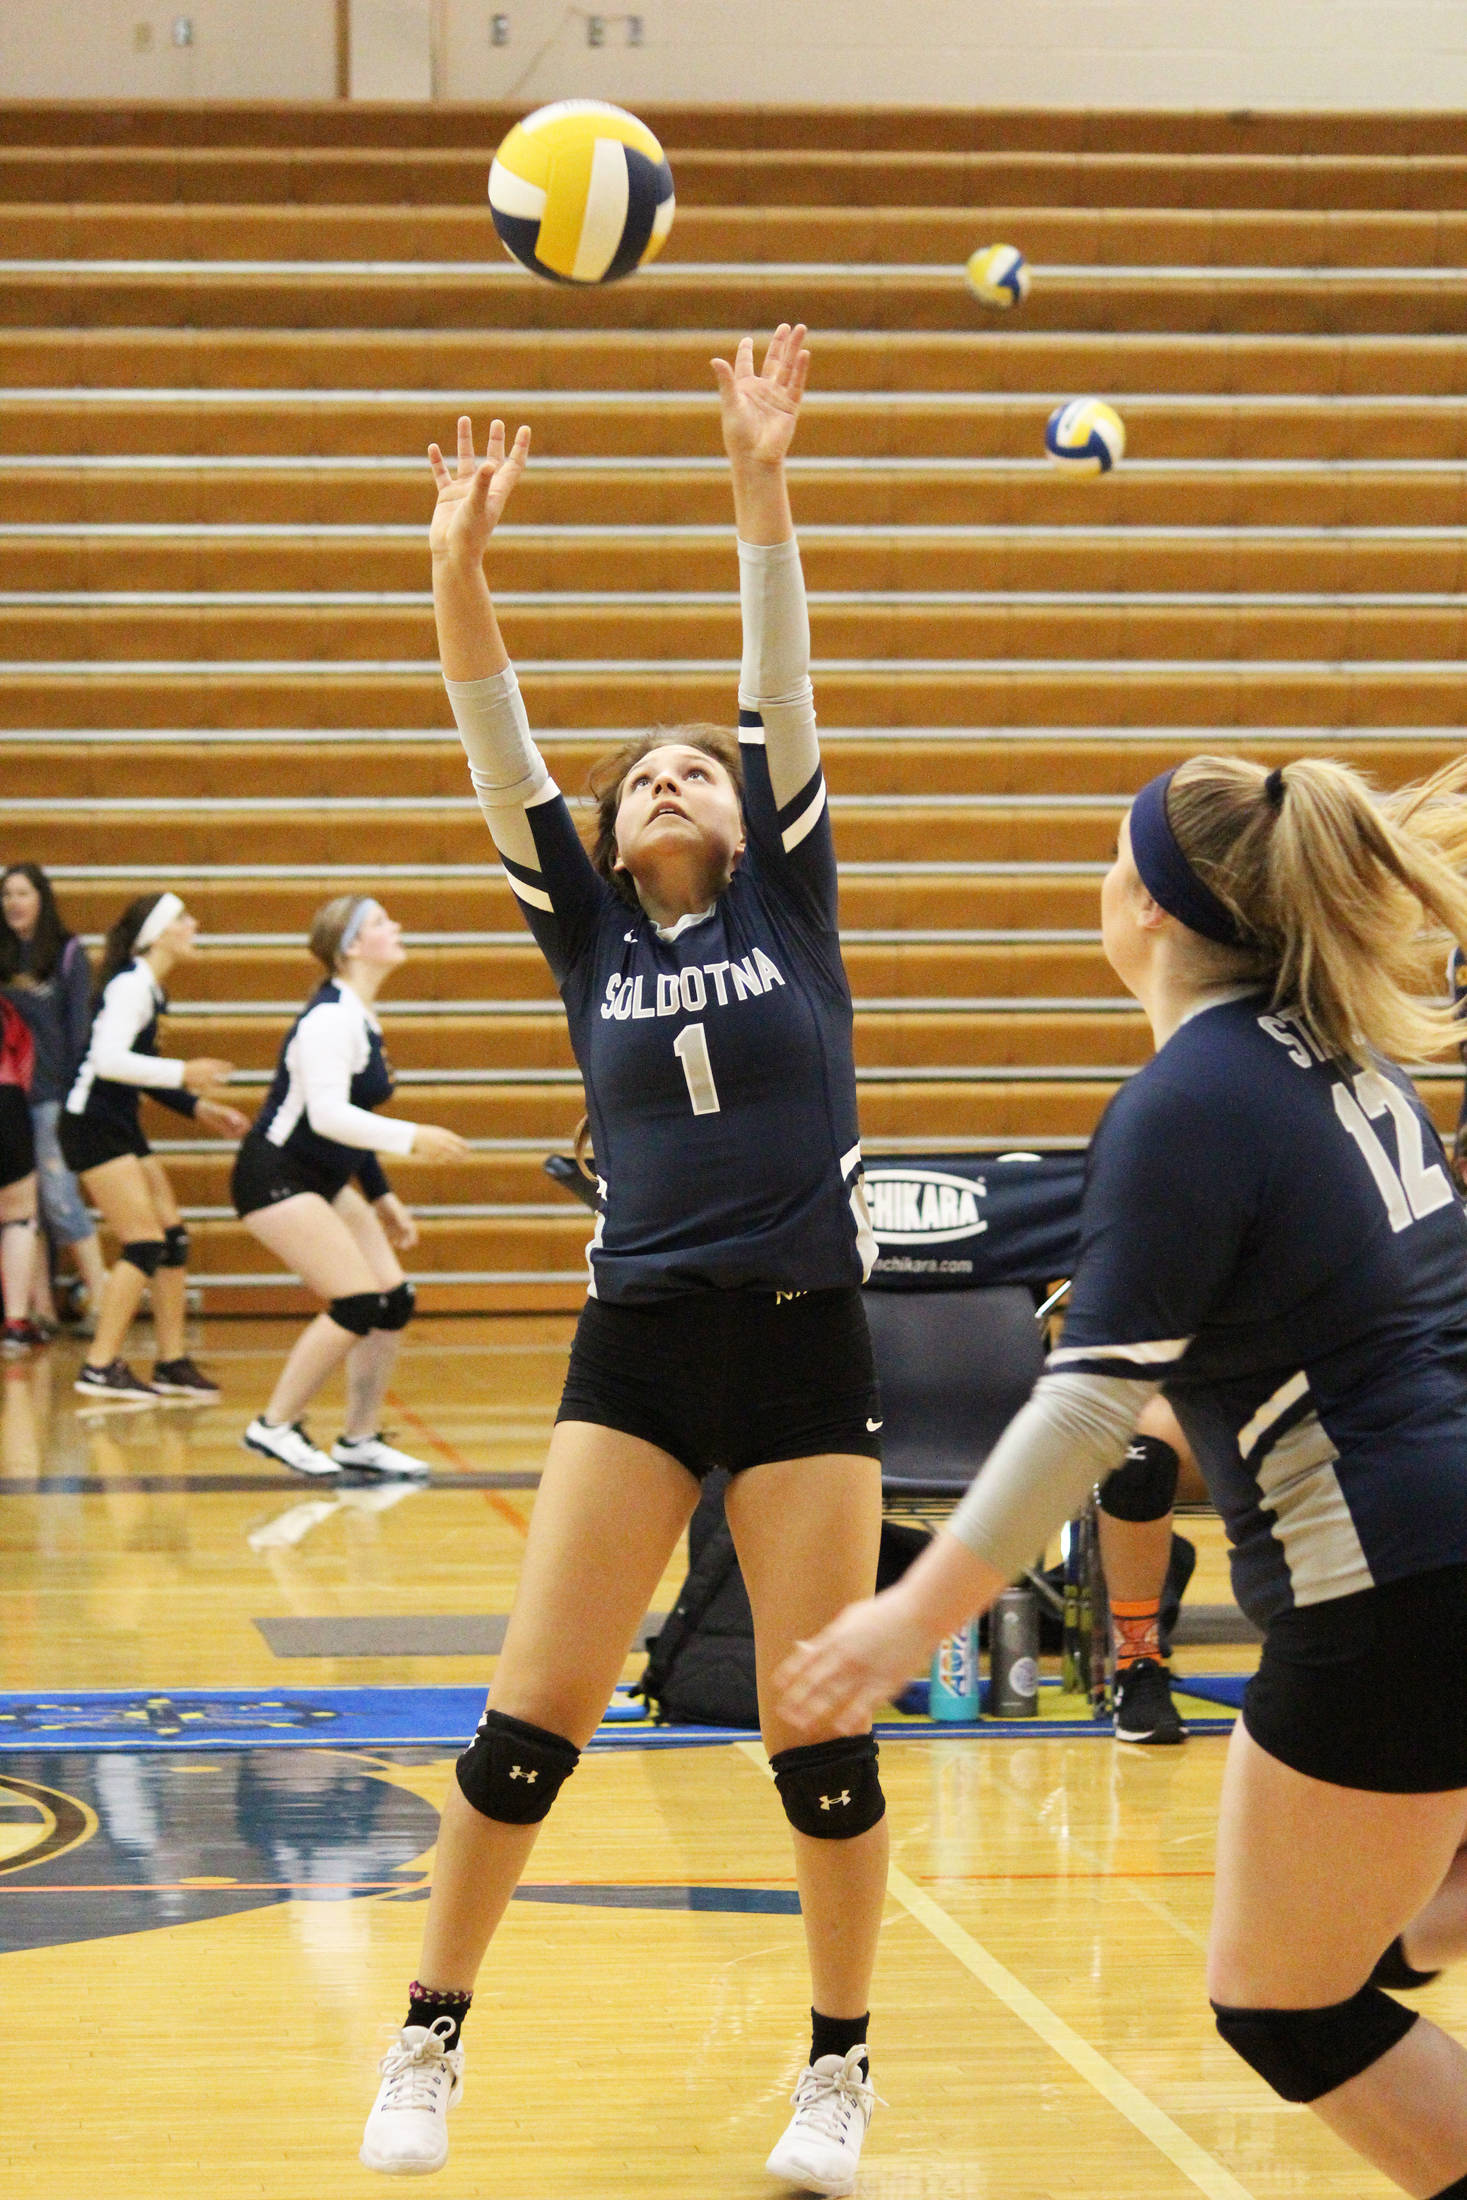 Soldotna’s Hosanna Van Hout sets the ball during a Saturday, Aug. 24, 2019 volleyball game Saturday, Aug. 24, 2019 during the Homer Jamboree tournament at the Alice Witt Gymnasium in Homer, Alaska. (Photo by Megan Pacer/Homer News)